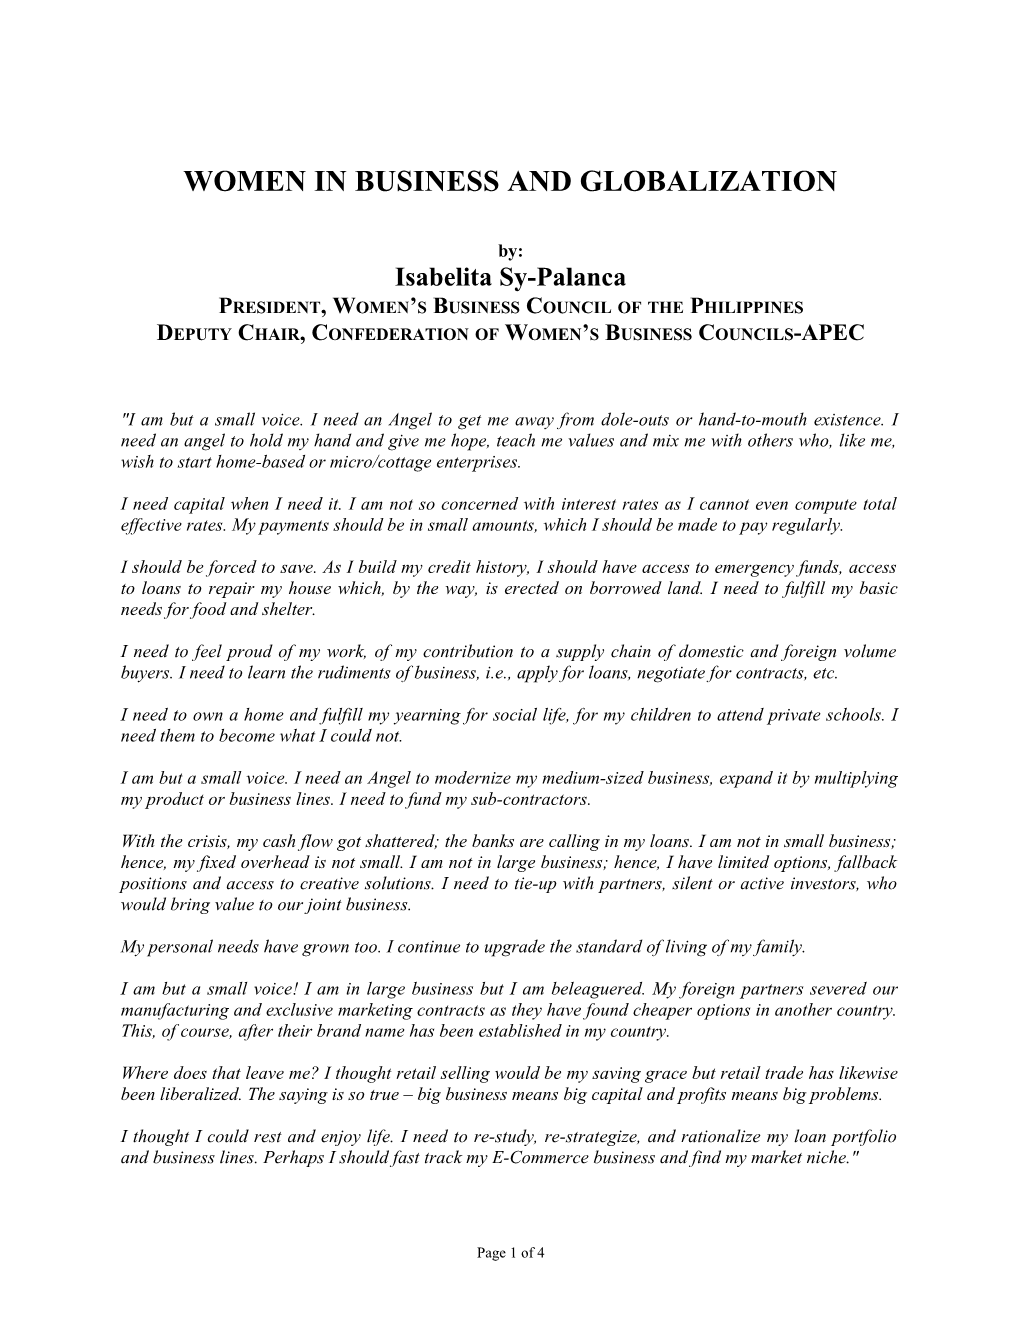 Women in Business and Globalization